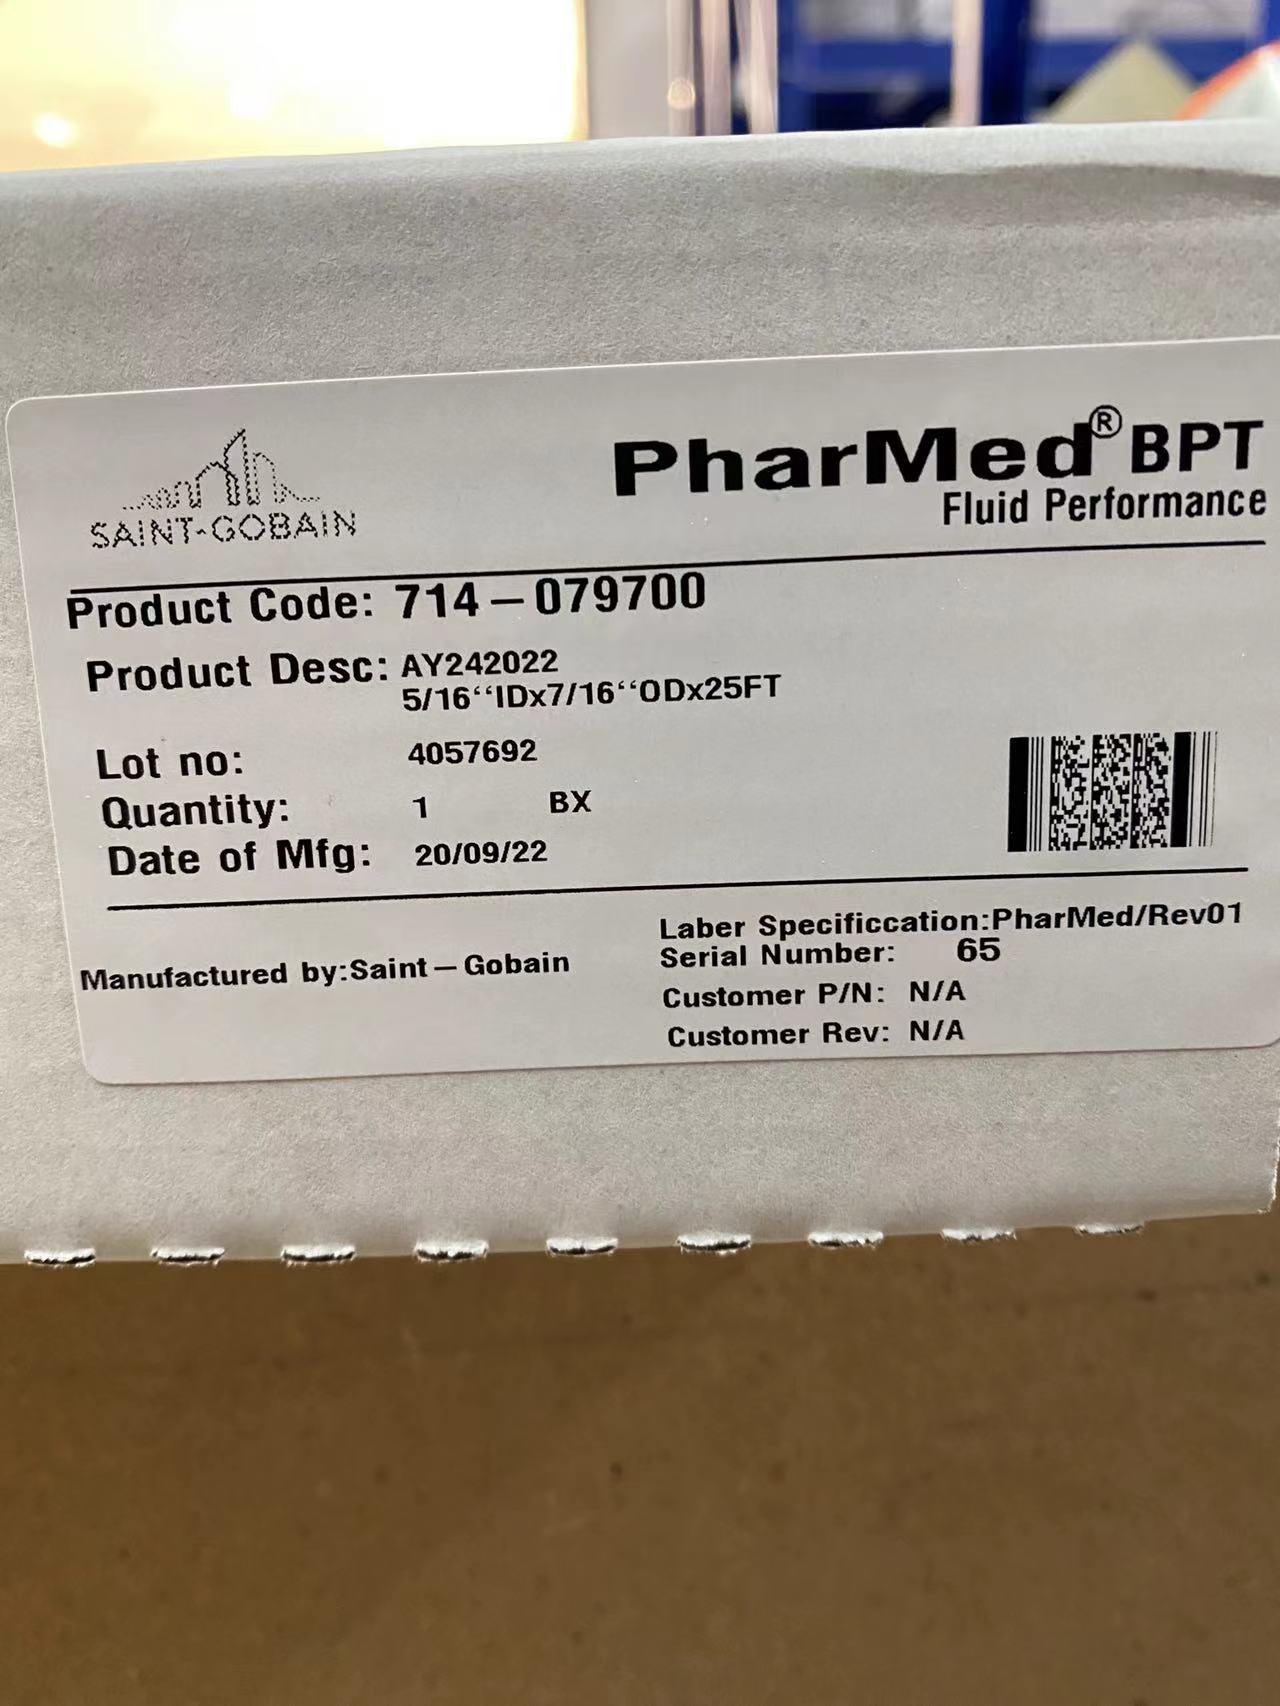 50m/100m /7.6m /Package Tygon Pharmed BPT Tube for Peristaltic Pump Cell Cultures Hose PharMed® BPT Tubing